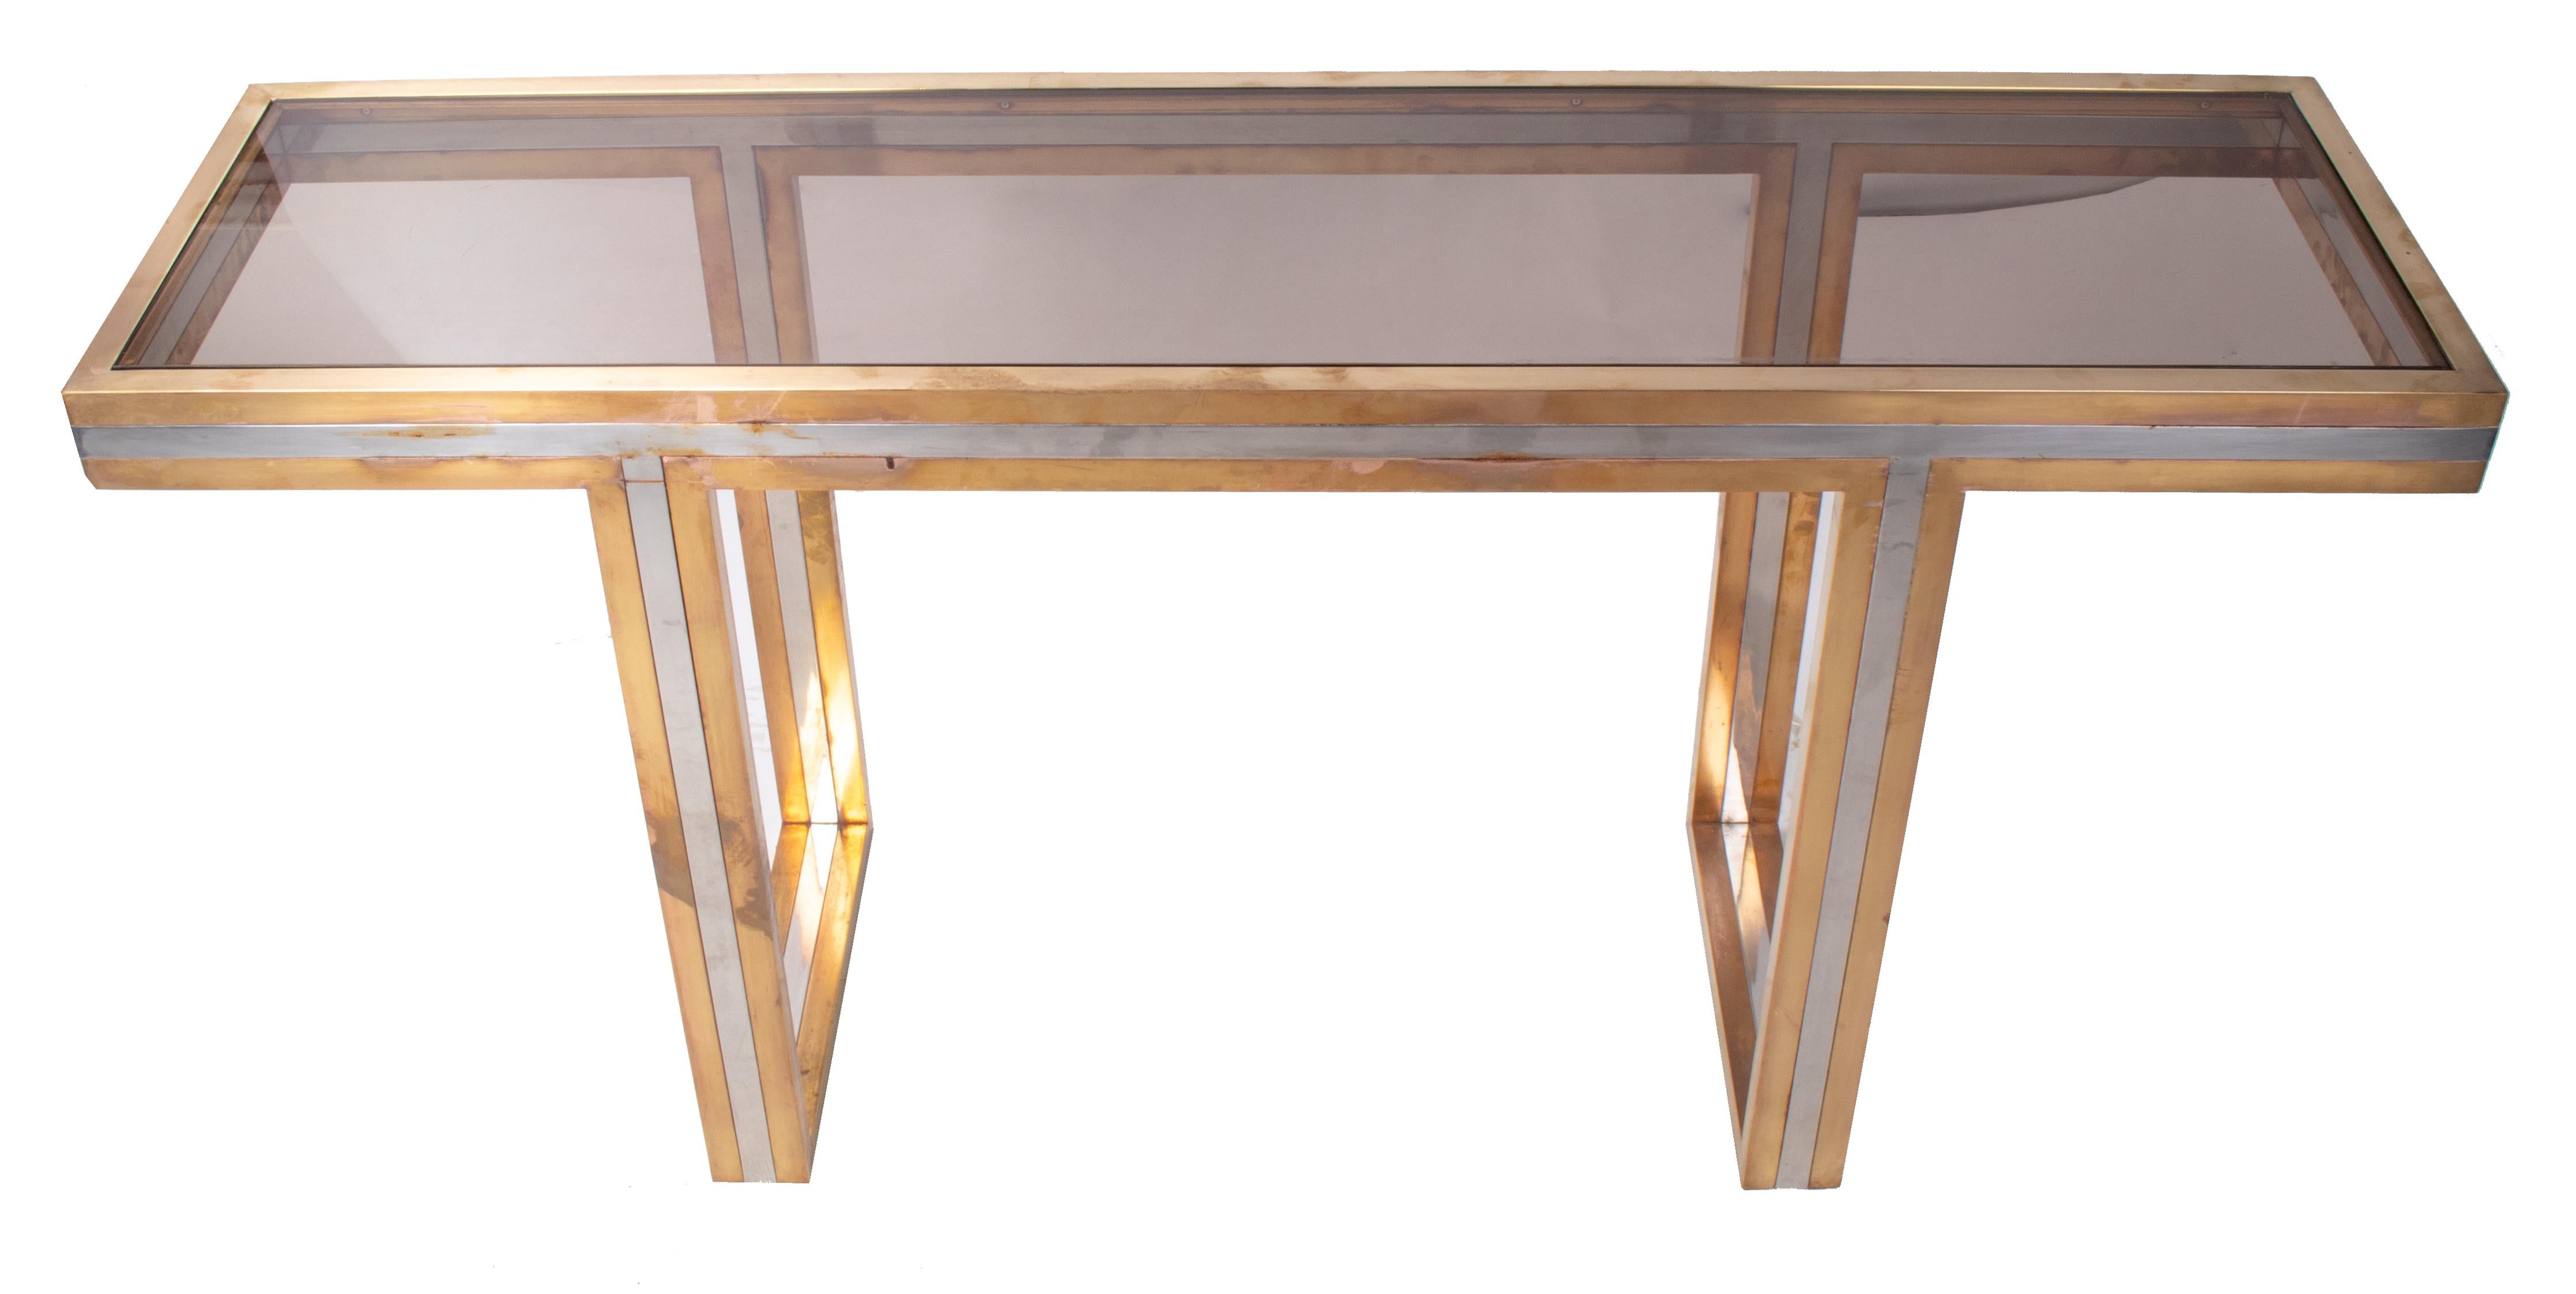 Bronze 1970s European Willy Rizzo Two-Tone Brass Console Table with Glass Top